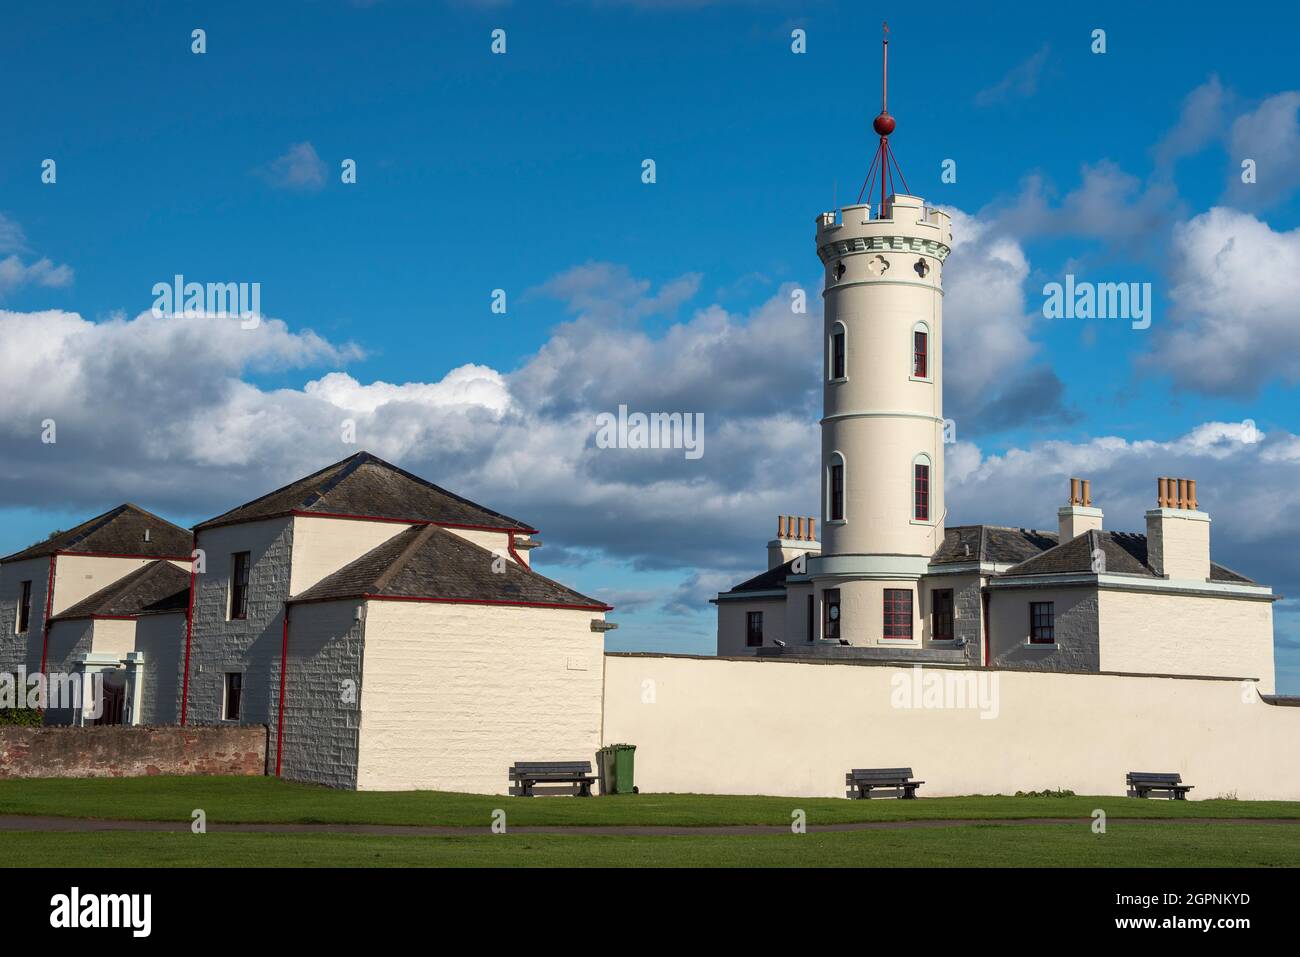 The Signal Tower Museum by Arbroath harbour, Angus, Scotland. Stock Photo